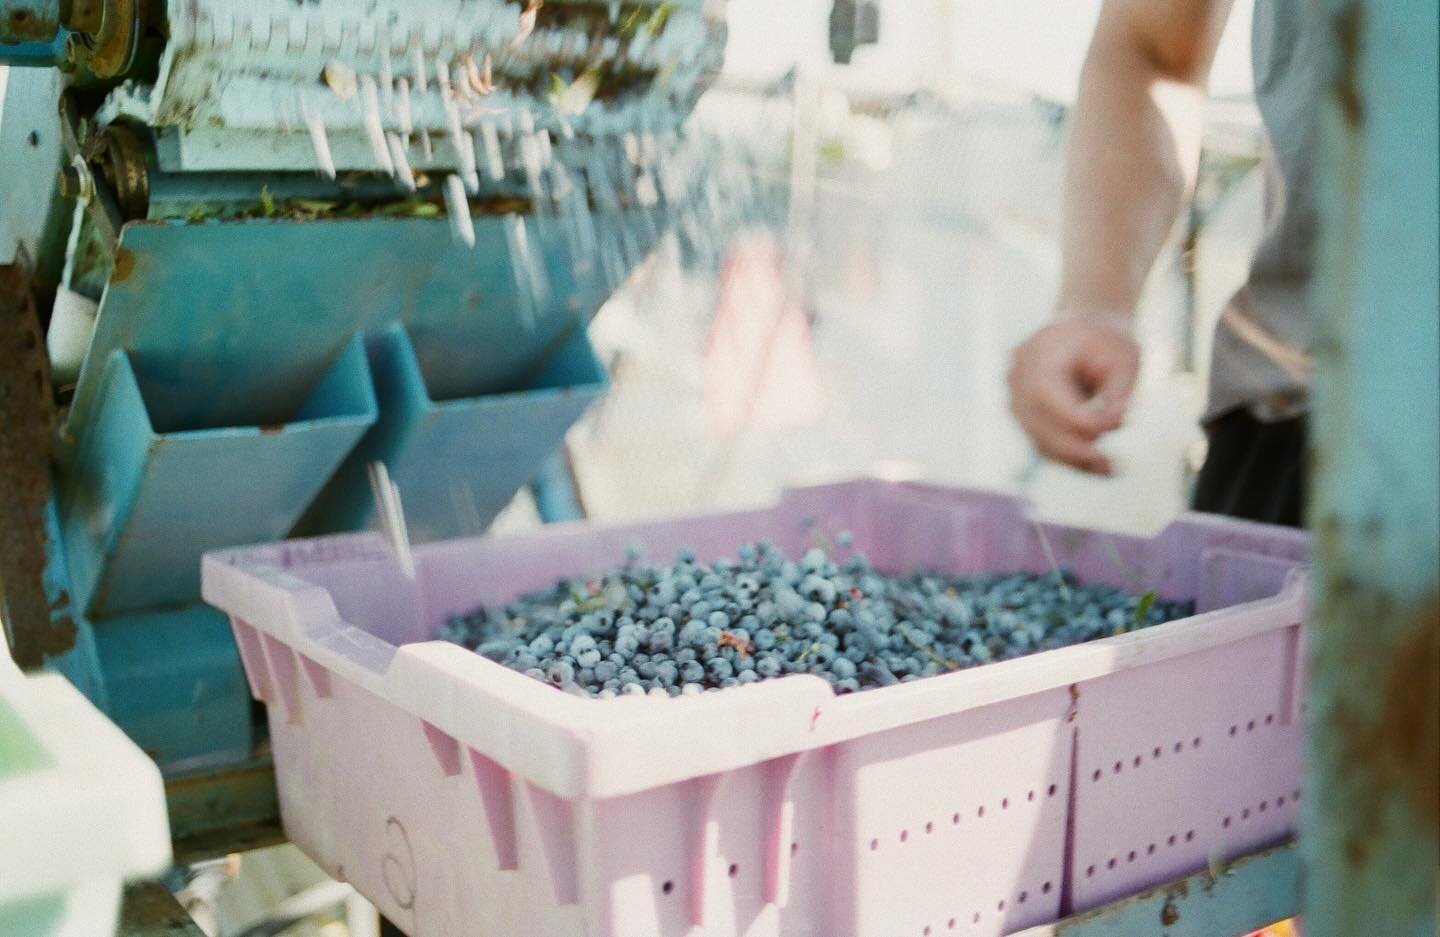 ⁣Our blueberry order form is LIVE! ⠀⠀
Follow the link in bio to our website to place your order for 10lb. boxes of organic wild Maine Blueberries.⠀⠀
In recognition of Pride month, starting today through Thursday, July 1st we will be donating $5 for e